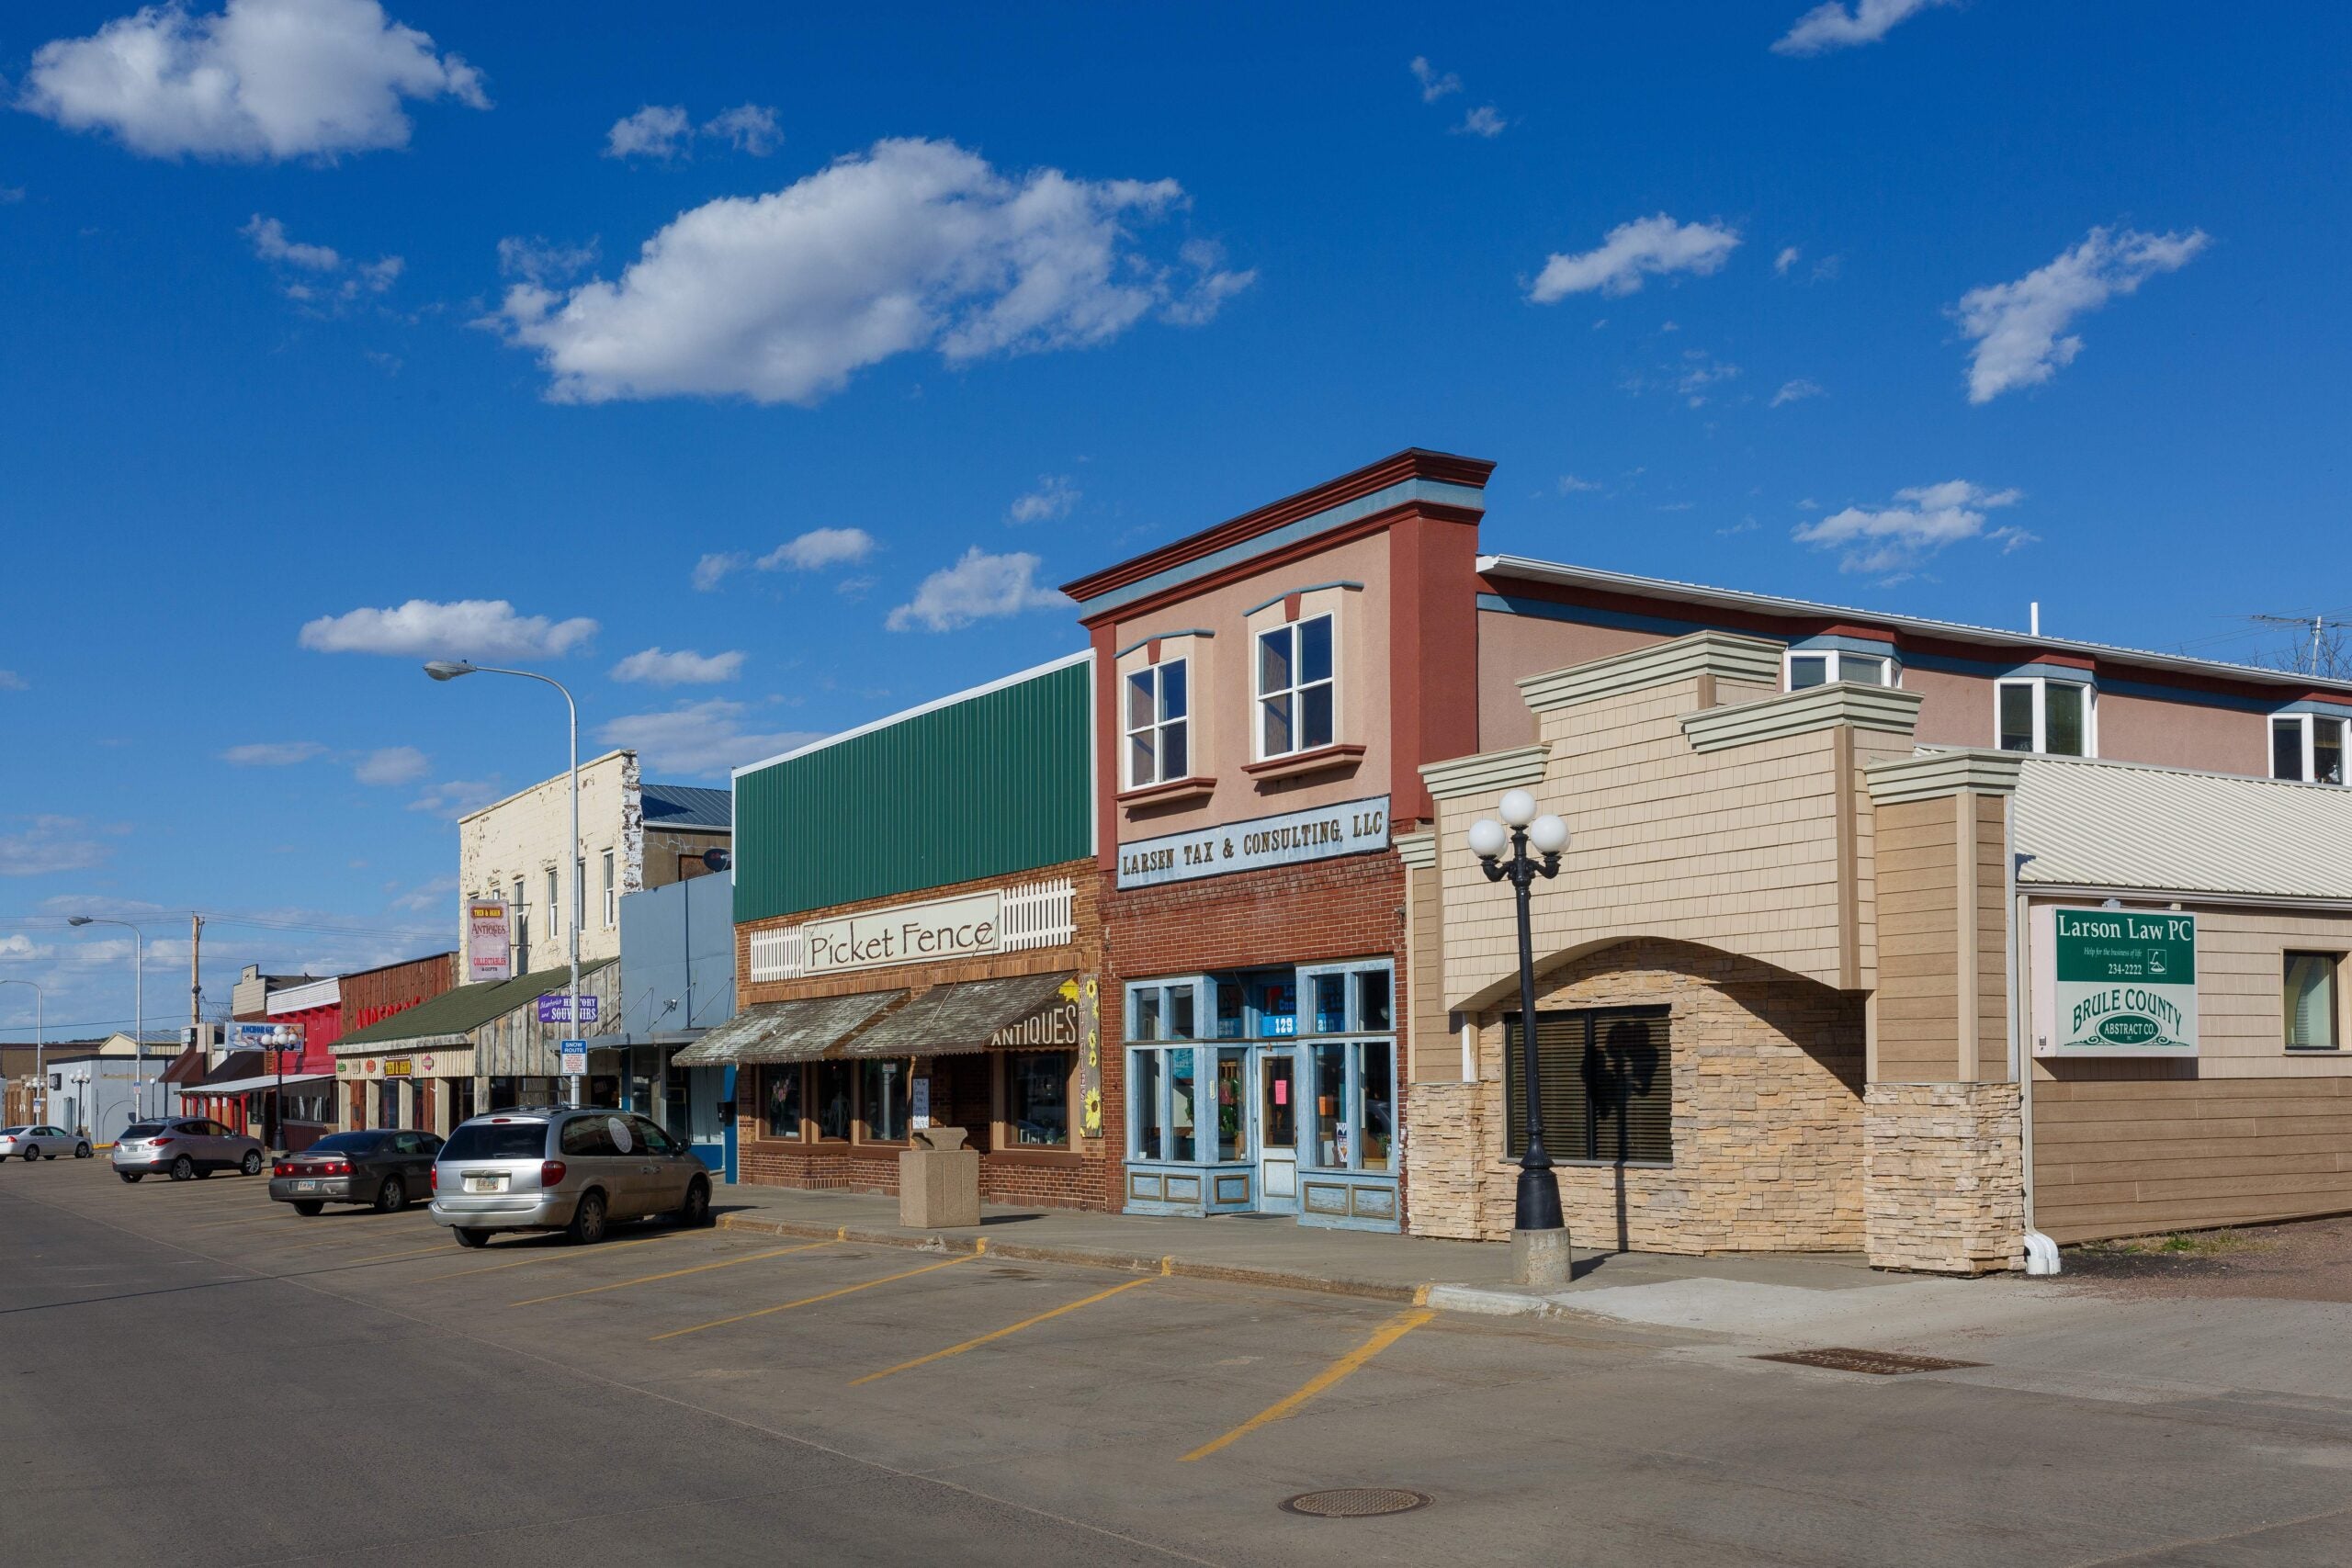 A street is seen in Chamberlain, South Dakota, during the novel coronavirus pandemic on April 21, 2020. - For months, sparsely populated South Dakota watched as the coronavirus ravaged far-off coastal cities. The state now has one of the largest outbreaks in the US, but its governor refuses to impose a lockdown. (Photo by Kerem Yucel / AFP) (Photo by KEREM YUCEL/AFP via Getty Images)